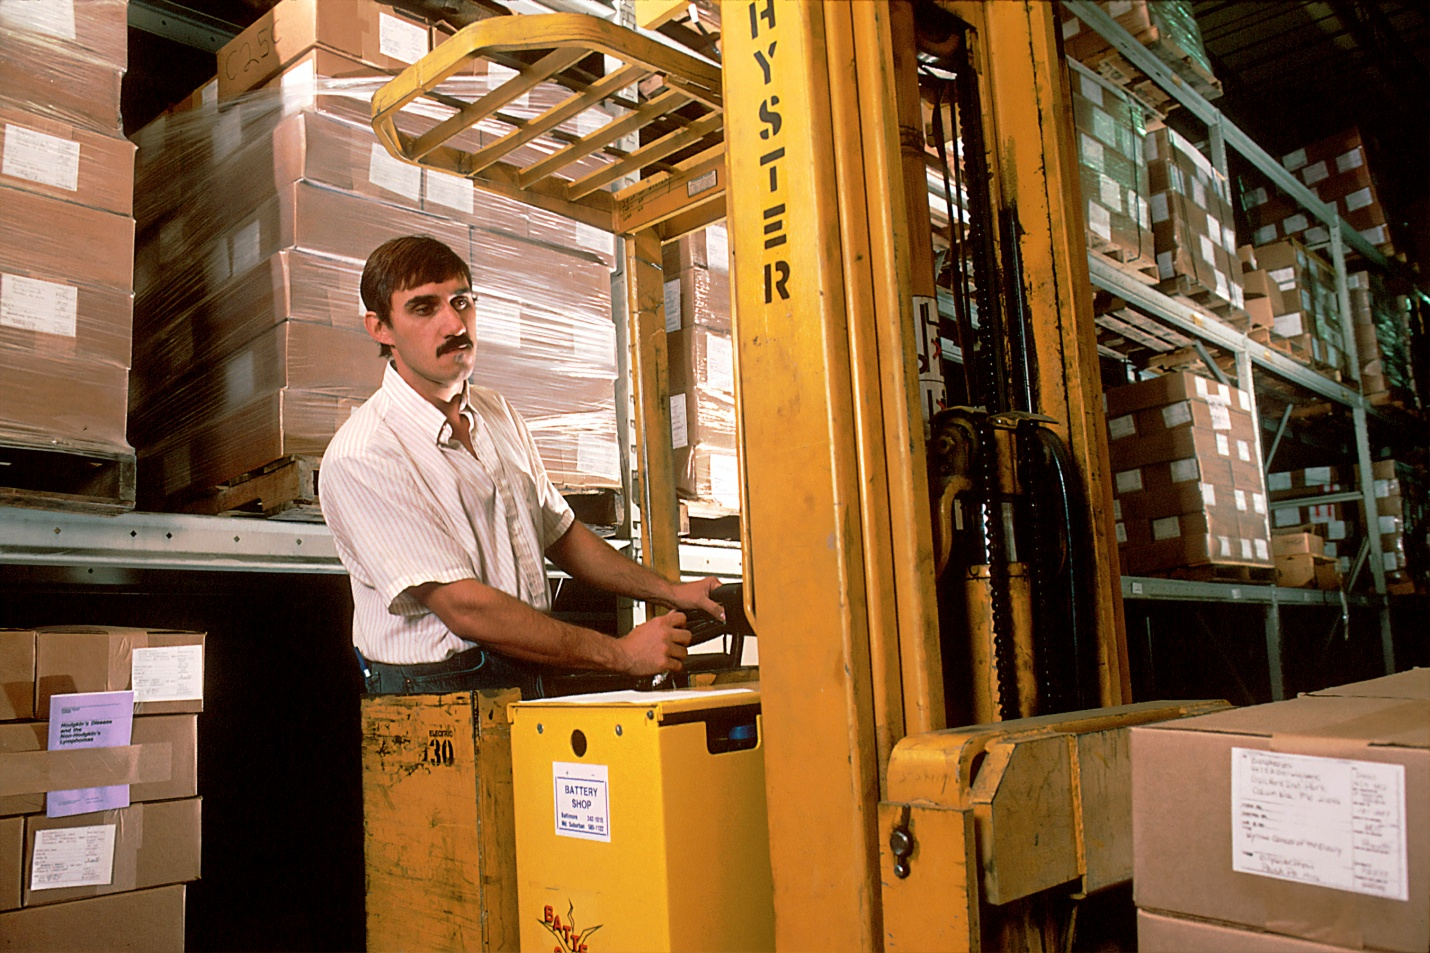 A man operating a forklift in a warehouse